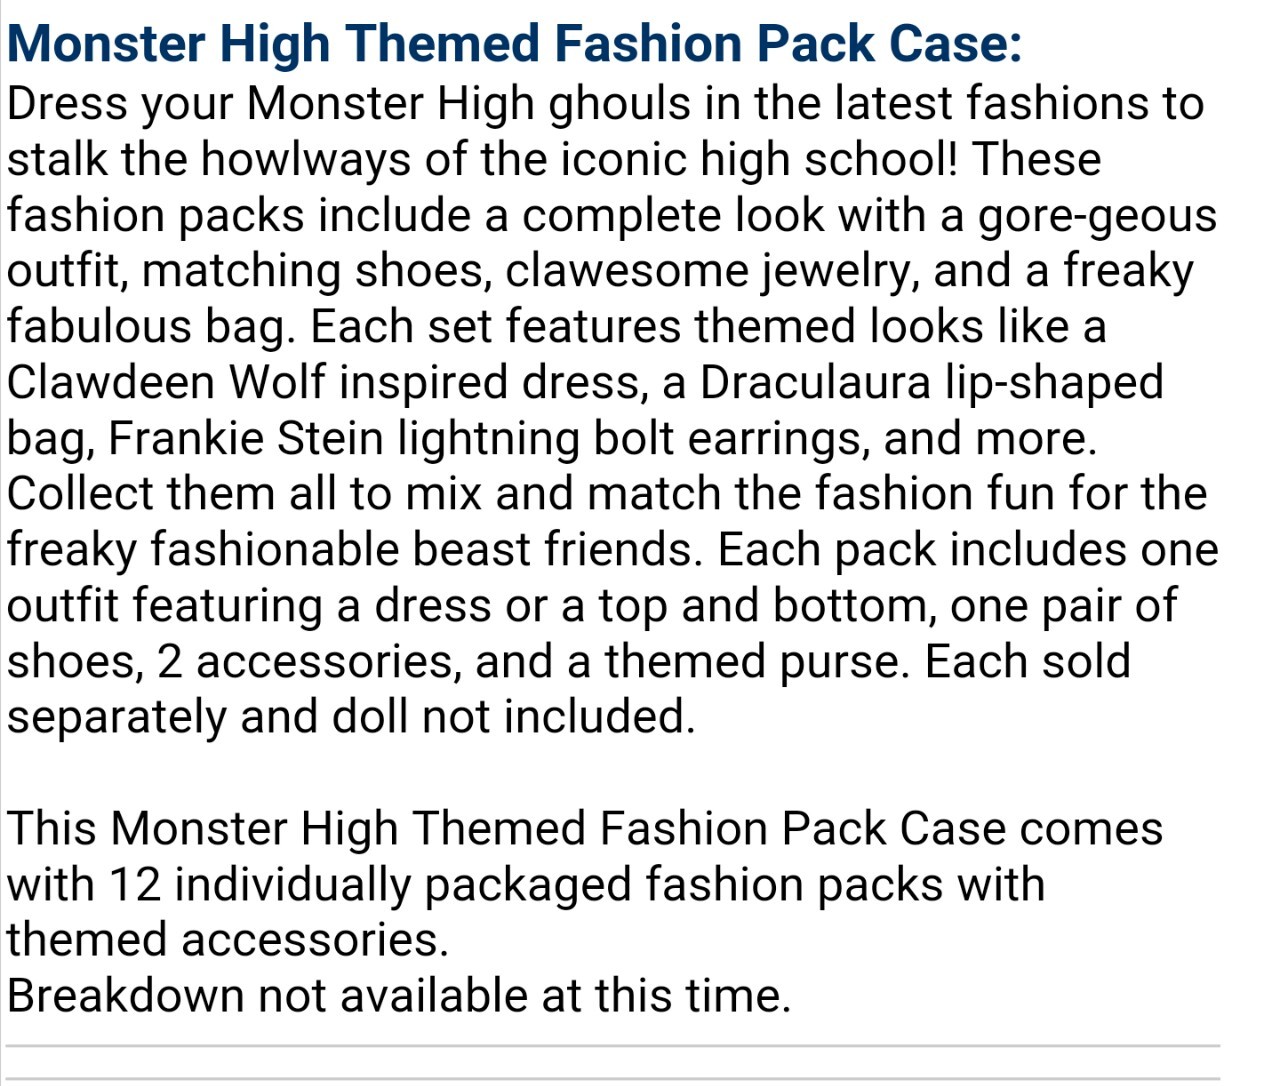 momdusa:

riggles323rd:

stephanemiroux:

peppapigvevo:

muse9429:

The fashion pack screenshot floating around got me curious so I checked the website in the url (entertainmentearth.com) and found some interesting things. I took screen shots of the descriptions of anything saying fashion pack and a Frankie I hadn’t heard about. It looks like Mattel is interested in fashion packs again. (with the timing and such I’m assuming they’re coming from the reboot) the availability dates are May and June 2016.

interesting to note that spectra is explicitly listed in one of those descriptions! so its safe to assume that she wont be replaced by ari

I can’t believe we’re getting fashion packs back. Now I just need Abbey to escape budget line hell.

This is my thinking…We won’t be seeing Abbey or Spectra or Ghoulia at all this year. Sad. Yup!
Perhaps Spectra’s name in the description was just a placeholder for Ari Hauntington. 
What we will be seeing: Frankie, Draculaura, Clawdeen, Cleo and Lagoona as our 5 core ghouls. Mattel will introduce us to Moanica Yelps and Ari Hauntington to replace Ghoulia and Spectra respectively to test whether or not these NEW characters sell better. 
Like everyone else I’m happy fashion packs are back on the table…let’s just hope they’re not as basic looking as the outfits the core reboot ghouls are sporting.


*a-hem* Moanica D’Kay*I wonder if Moanica will have fewer brain details cause that was the thing that seemed to make parents go “ew” (well, I’ve seen it a few times). And I was hoping for some fashion packs that anyone could wear (like the little Barbie packs) but it sounds like they’ll be for the individual characters. You know though? We’re getting accessories. I like accessories. I’m just gonna wait and see about the clothes